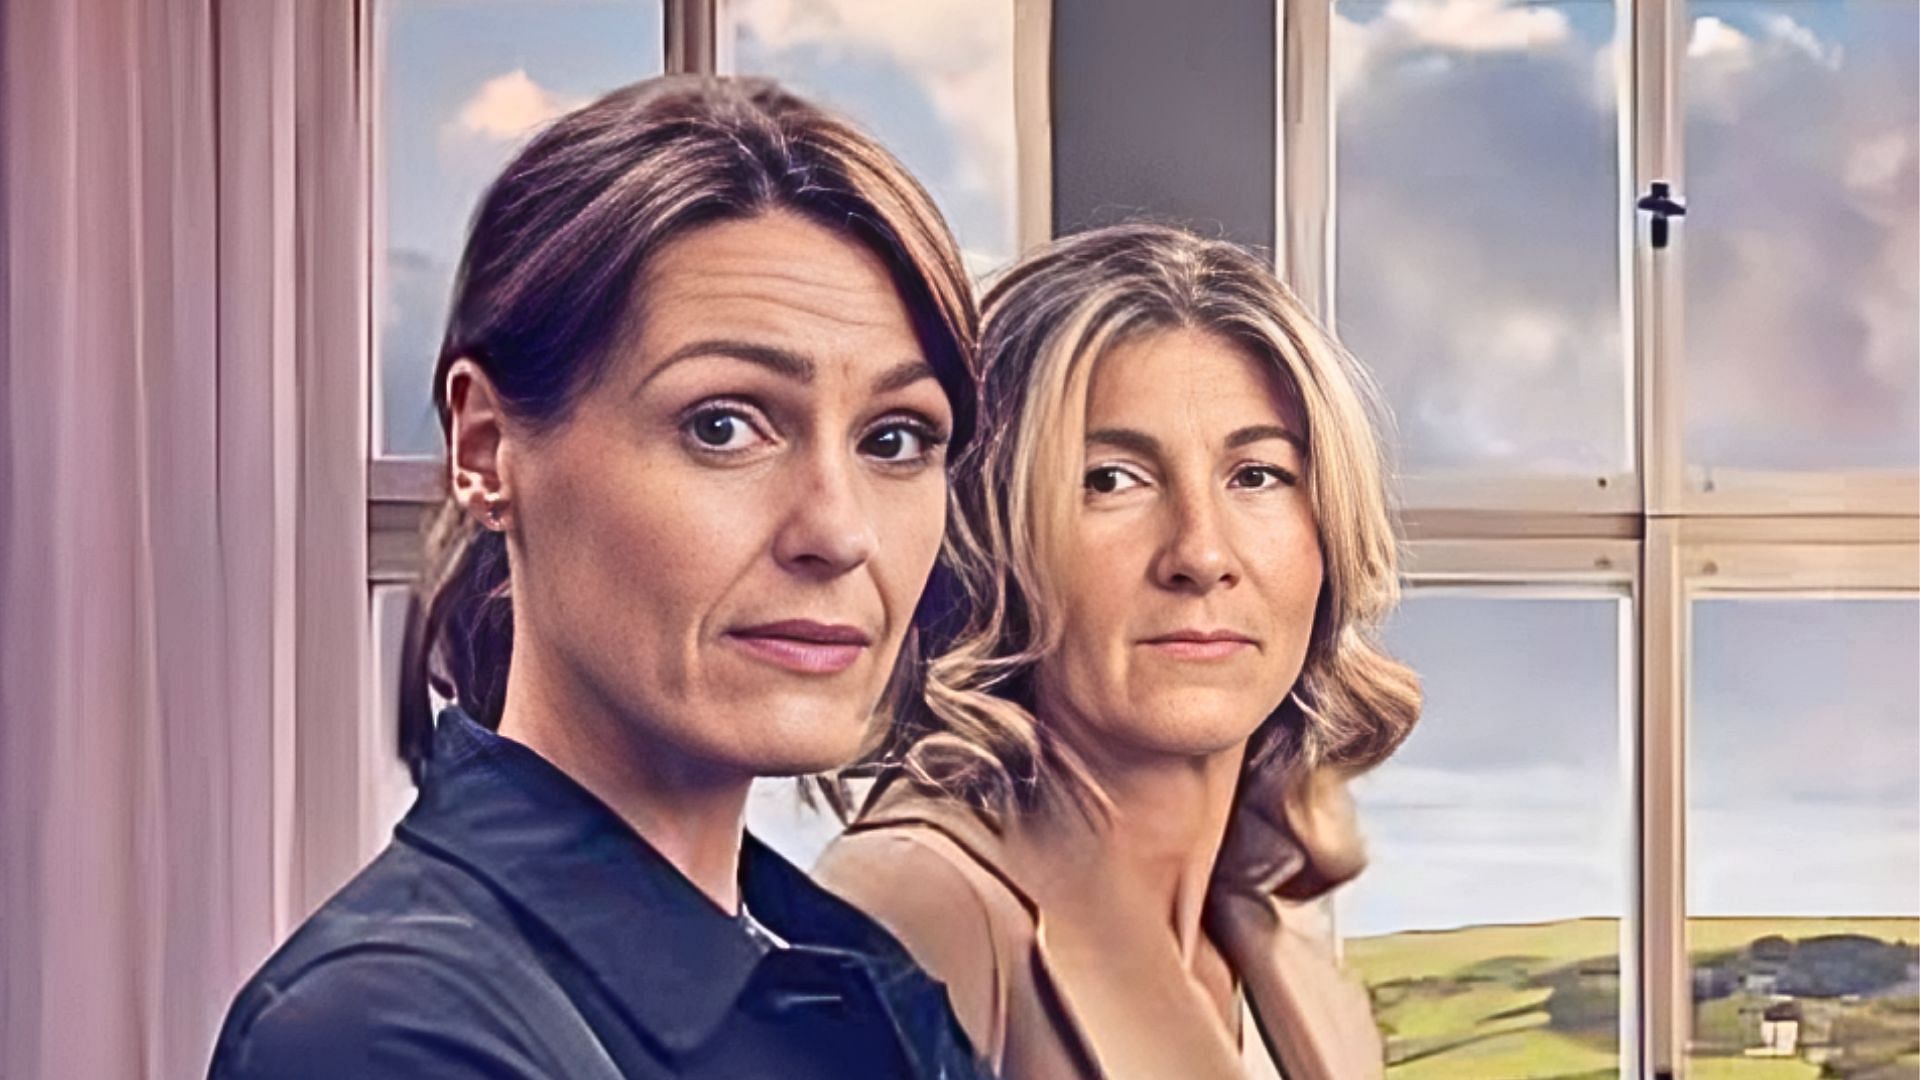 Suranne Jones and Eve Best play sisters Becca and Rosaline in Maryland (Image via PBS)